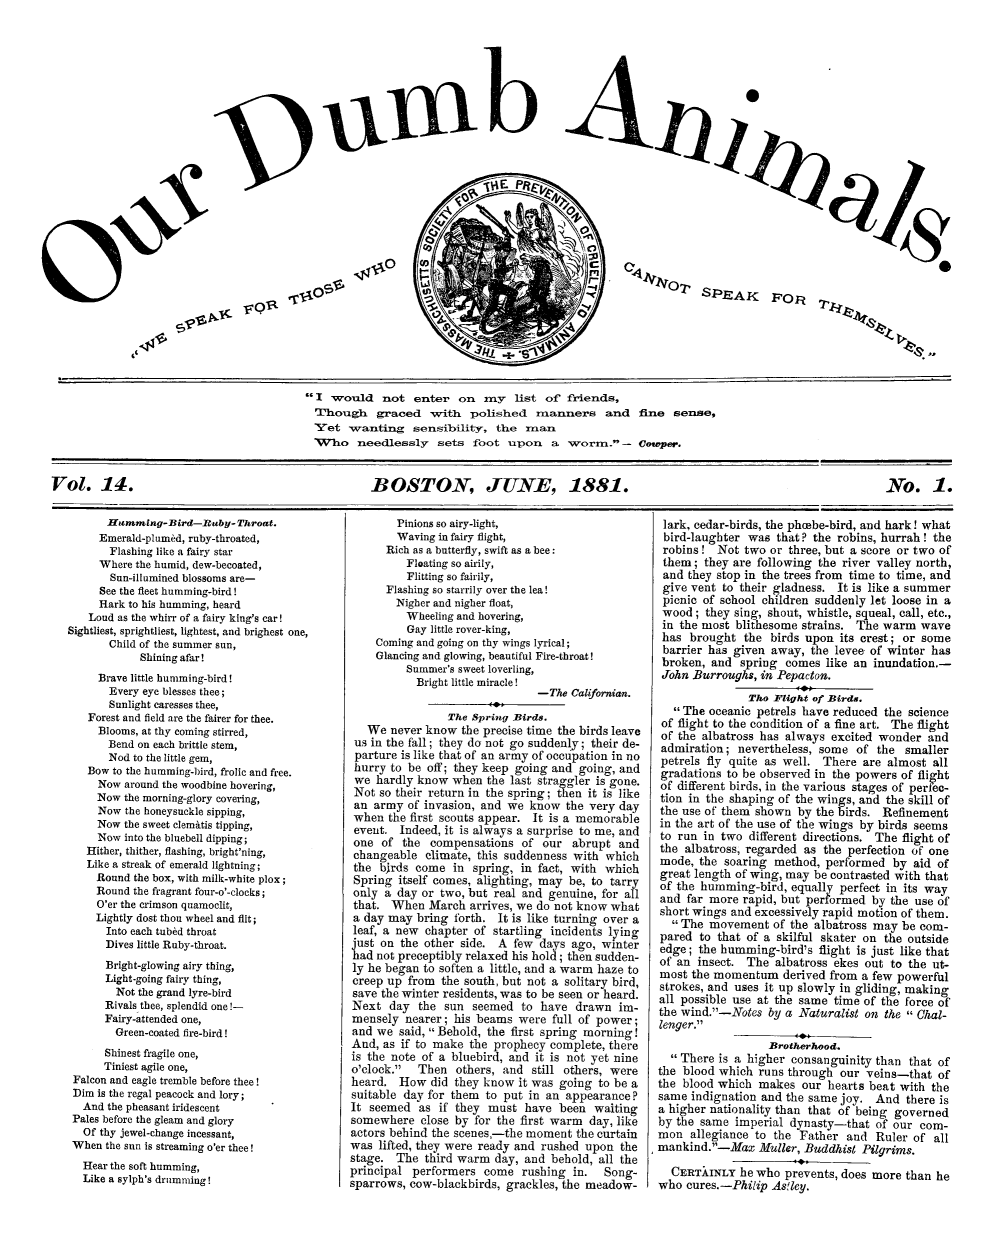 handle is hein.journals/animals14 and id is 1 raw text is: ~p~.b                                          I  would   not   enter  on  my   list of  friends,                                          Though graced with polished manners and fine sense,                                          Yet wanting sensibility, the man                                          TVho needlessly sets foot upon a worm. - Cowper.Vol. 14.                                            BOSTON, JUNE, 1881.                                                                  No. 1.      Hurmmng-Bird-Ruby-Throat.      Emerald-plum~d, ruby-throated,      Flashing like a fairy star      Where the humid, dew-becoated,      Sun-illumined blossoms are-      See the fleet humming-bird!      Hark to his humming, heard   Loud as the whirr of a fairy king's car!Sightliest, sprightliest, lightest, and brighest one,       Child of the summer sun,            Shining afar!     Brave little humming-bird!       Every eye blesses thee;       Sunlight caresses thee,   Forest and field are the fairer for thee.     Blooms, at thy coming stirred,       Bend on each brittle stem,       Nod to the little gem,   Bow to the humming-bird, frolic and free.     Now around the woodbine hovering,     Now the morning-glory covering,     Now the honeysuckle sipping,     Now the sweet clemitis tipping,     Now into the bluebell dipping;   Hither, thither, flashing, bright'ning,   Like a streak of emerald lightning;     Round the box, with milk-white plox;     Round the fragrant four-o'-clocks;     O'er the crimson quamoclit,     Lightly dost thou wheel and flit;     Into each tub~d throat     Dives little Ruby-throat.     Bright-glowing airy thing,     Light-going fairy thing,        Not the grand lyre-bird      Rivals thee, splendid one!-      Fairy-attended one,        Green-coated fire-bird!      Shinest fragile one,      Tiniest agile one, Falcon and eagle tremble before thee! Dim is the regal peacock and lory; And   the pheasant iridescent Pales before the gleam and glory   Of thy jewel-change incessant, When the sun is streaming o'er thee! Hear  the soft humming, Like  a sylph's drumming!        Pinions so airy-light,        Waving in fairy flight,      Rich as a butterfly, swift as a bee:         Floating so airily,         Flitting so fairily,      Flashing so starrily over the lea!        Nigher and nigher float,        Wheeling  and hovering,        Gay  little rover-king,    Coming and going on thy wings lyrical;    Glancing and glowing, beautiful Fire-throat!         Summer's sweet loverling,           Bright little miracle!                               -The Californian.                The Spring Birds.   We  never know the precise time the birds leave us in the fall; they do not go suddenly; their de- parture is like that of an army of occupation in no hurry to be off; they keep going and going, and we hardly know  when  the last straggler is gone. Not so their return in the spring; then it is like an army  of invasion, and we know  the very day when the first scouts appear. It is a memorable event. Indeed, it is always a surprise to me, and one of  the compensations  of  our  abrupt and changeable climate, this suddenness with which the bjrds come  in spring, in fact, with which Spring itself comes, alighting, may be, to tarry only a day or two, but real and genuine, for all that. When  March  arrives, we do not know what a day may bring forth. It is like turning over a leaf, a new chapter of startling incidents lying just on the other side. A few days ago, winter had not preceptibly relaxed his hold; then sudden- ly he began to soften a little, and a warm haze to creep up from the south, but not a solitary bird, save the winter residents, was to be seen or heard. Next day  the  sun seemed  to have  drawn  im- mensely nearer; his beams  were full of power; and we said, Behold, the first spring morning! And, as if to make the prophecy complete, there is the note of a bluebird, and it is not yet nine o'clock. Then  others, and  still others, were heard. How  did they know  it was going to be a suitable day for them to put in an appearance ? It seemed as  if they must  have been  waiting somewhere  close by for the first warm day, like actors behind the scenes,-the moment the curtain was lifted, they were ready and rushed upon the stage. The third warm  day, and behold, all theprincipal performers  come  rushing  in.  Song-sparrows, cow-blackbirds, grackles, the meadow-lark, cedar-birds, the phcabe-bird, and hark! whatbird-laughter  was  that? the robins, hurrah! therobins!   Not two or three, but a score or two ofthem;   they are following the river valley north,and  they stop in the trees from time to time, andgive vent  to their gladness. It is like a summerpicnic of school children suddenly let loose in awood;   they sing, shout, whistle, squeal, call, etc.,in  the most blithesome strains. The warm  wavehas  brought  the  birds upon its crest; or somebarrier has given  away, the levee of winter hasbroken,  and  spring comes  like an inundation.-John  Burroughs, in Pepacton.               Tho Flight of Birds.   The oceanic petrels have reduced the science of flight to the condition of a fine art. The flight of the albatross has always excited wonder and admiration; nevertheless, some  of the  smaller petrels fly quite as well. There are almost all gradations to be observed in the powers of flight of different birds, in the various stages of perfee- tion in the shaping of the wings, and the skill of the use of them shown by the birds. Refinement in the art of the use of the wings by birds seems to run in two different directions. The flight of the albatross, regarded as the perfection of one mode, the soaring method,  performed  by aid of great length of wing, may be contrasted with that of the humming-bird, equally perfect in its way and far more rapid, but performed by the use of short wings and excessively rapid motion of them.   The movement   of the albatross may be com- pared to that of a skilful skater on the outside edge; the humming-bird's  flight is just like that of an insect. The albatross ekes out to the ut- most the momentum   derived from a few powerful strokes, and uses it up slowly in gliding, making all possible use at the same time of the force of the wind.-Notes by a Naturalist on the  Chal- lenger.                       4*,                  Brotherhood.  There  is a higher consanguinity than that ofthe blood which  runs through our veins-that  ofthe blood which  makes  our hearts beat with thesame  indignation and the same joy. And  there isa higher nationality than that of being governedby the same  imperial dynasty-that  of our com-mon  allegiance to the Father  and  Ruler of allmankind.-Max Muller,   Buddhist  Pilgrims.  CERTXINLY   he who prevents, does more than hewho  cures.-Philip Astley.AAO         f   IV I S P7 A S P E   A K                                                 4 1 & -t l